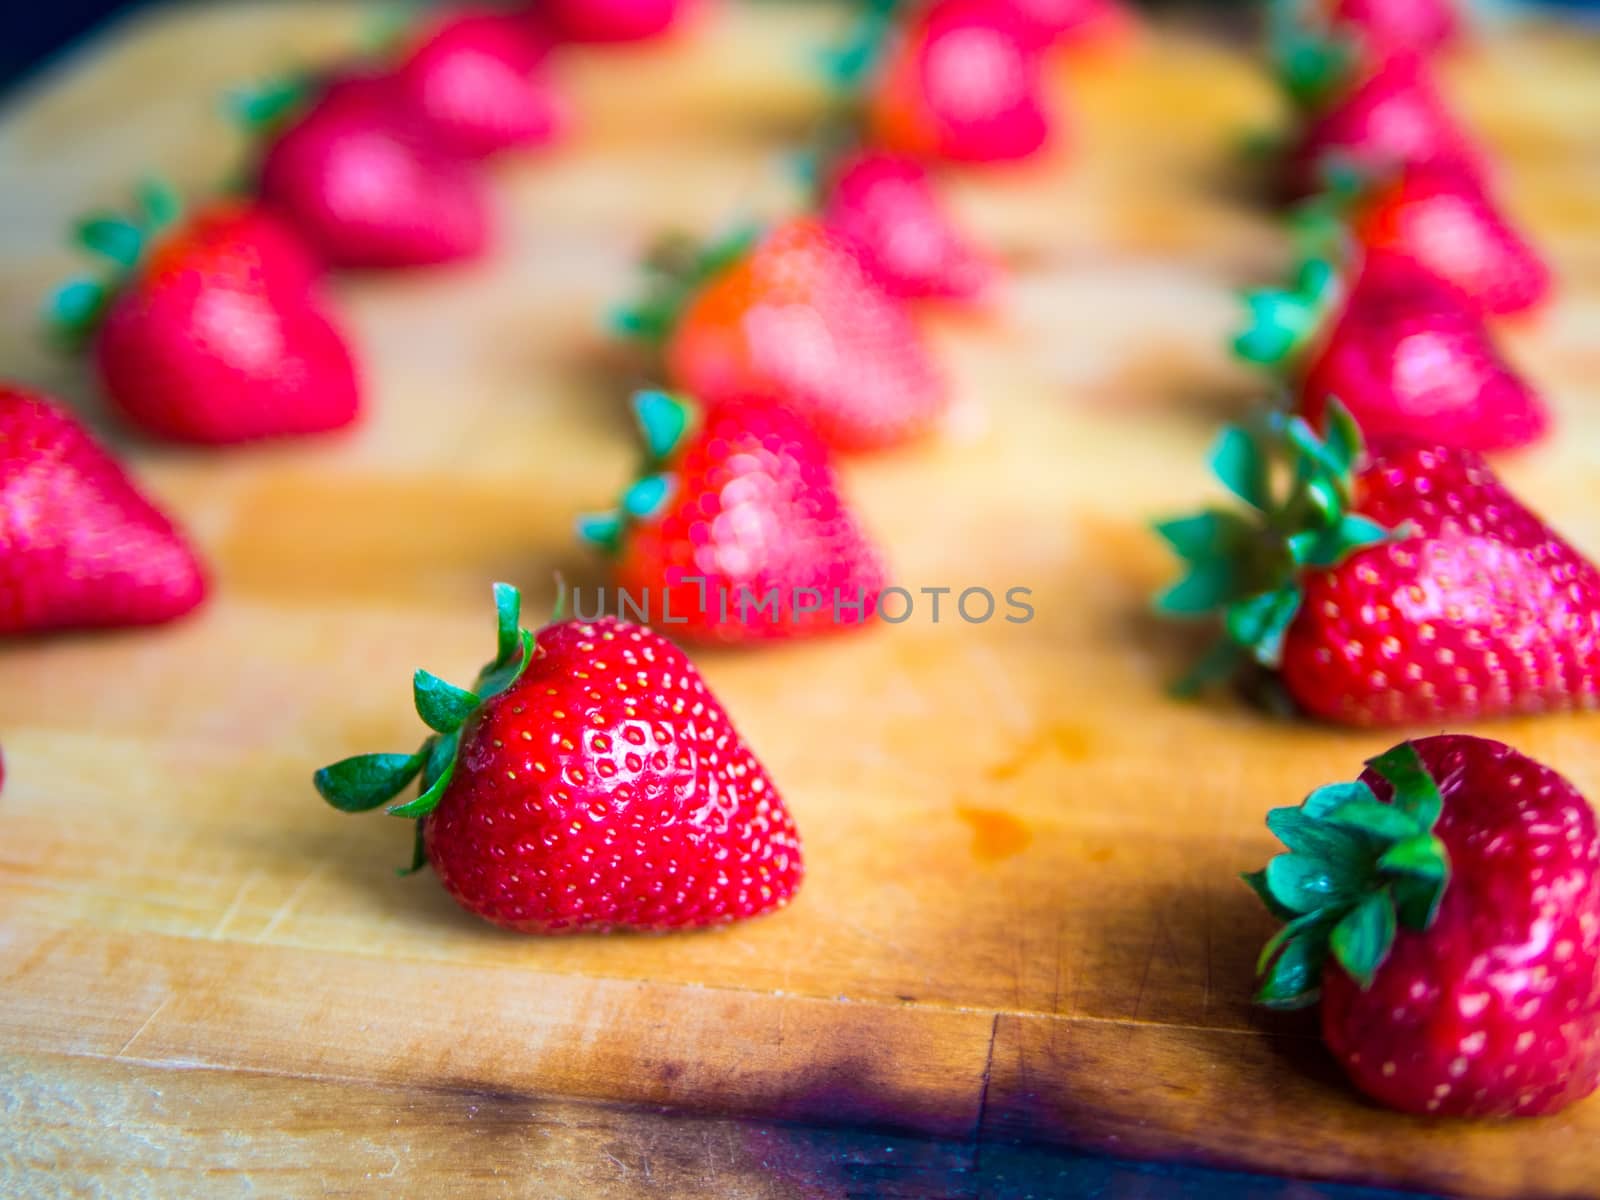 Arranged rows of strawberries on a wooden board